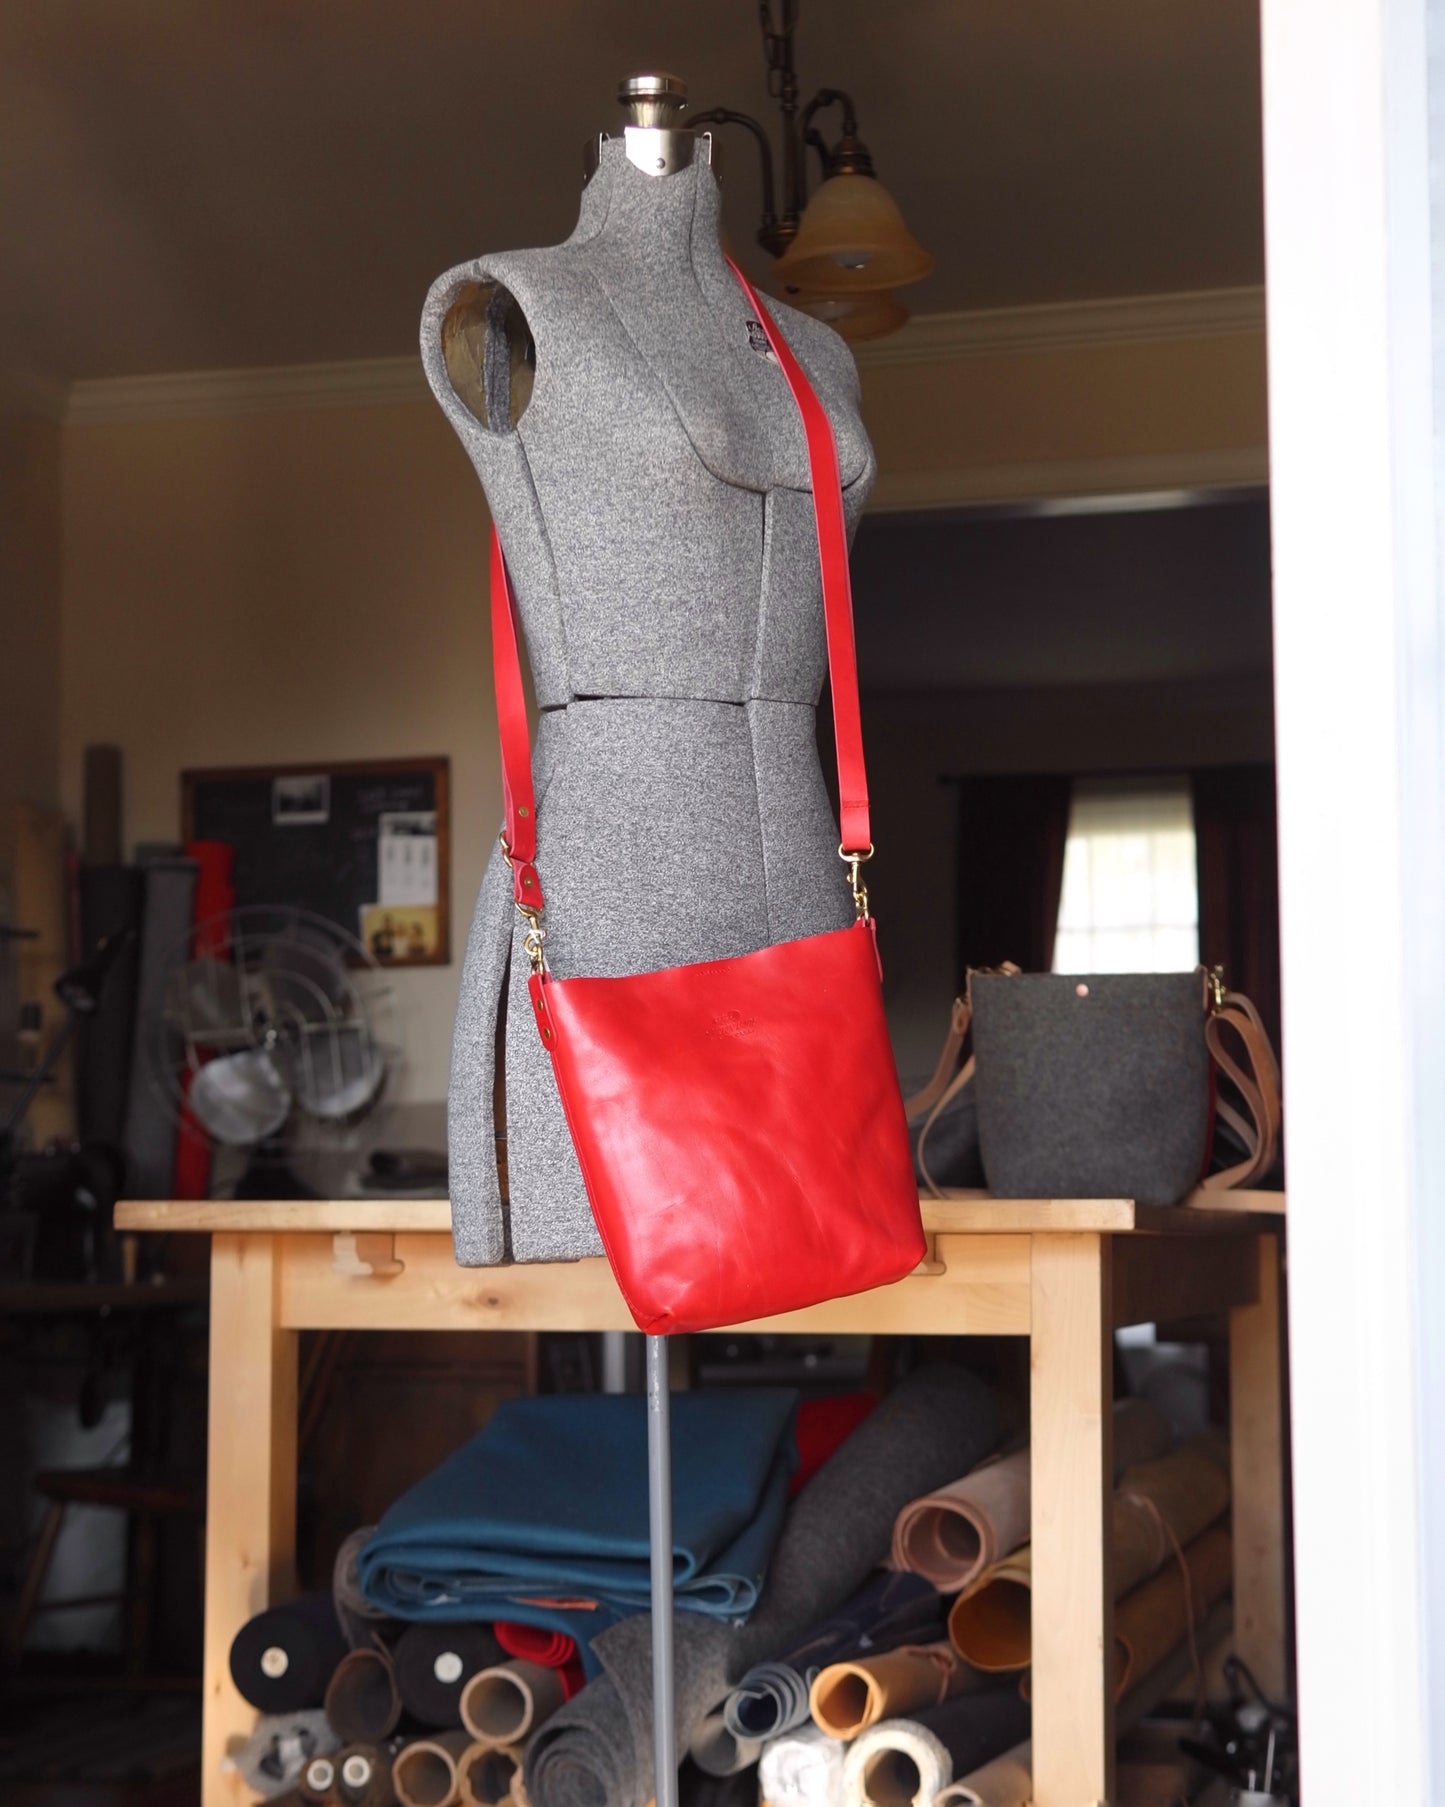 Substation Tote - Red Leather Crossbody